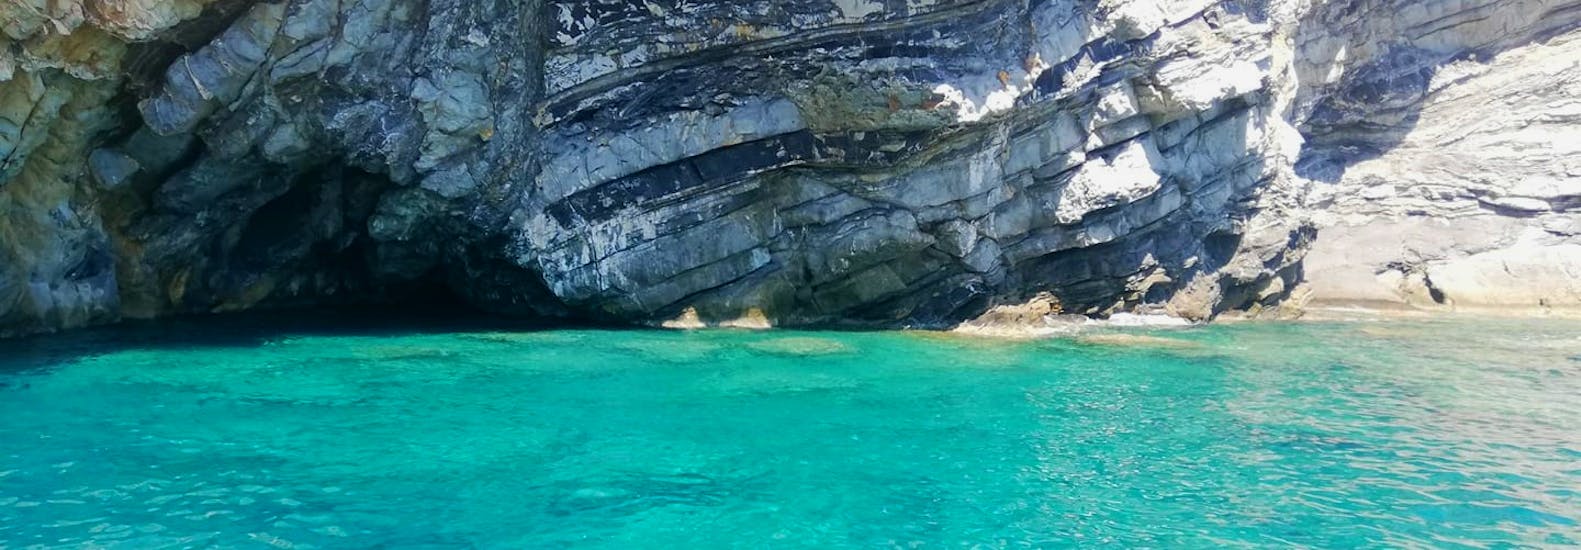 View of a cave that we'll admire during our Boat Trip around Elba from Marina di Campo with Dolphin Watching.